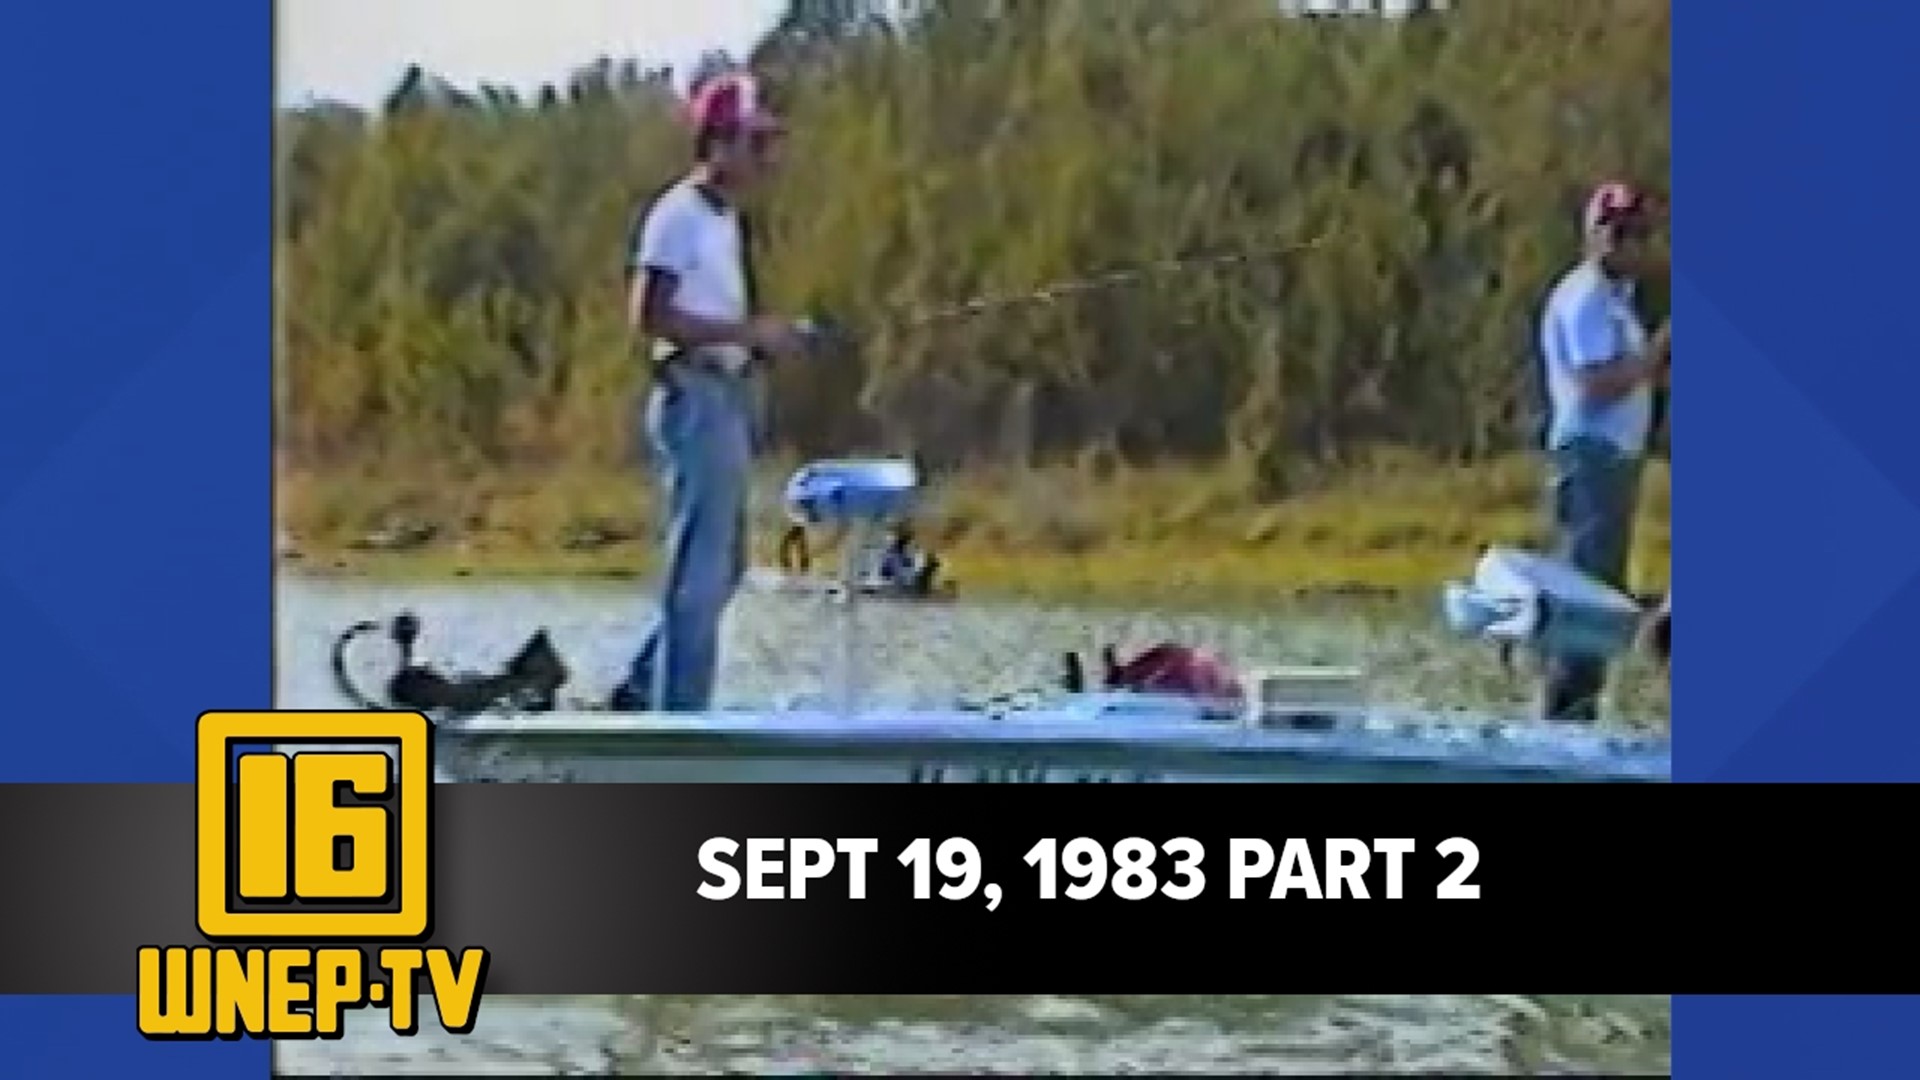 Join Nolan Johannes with curated stories from September 19, 1983.